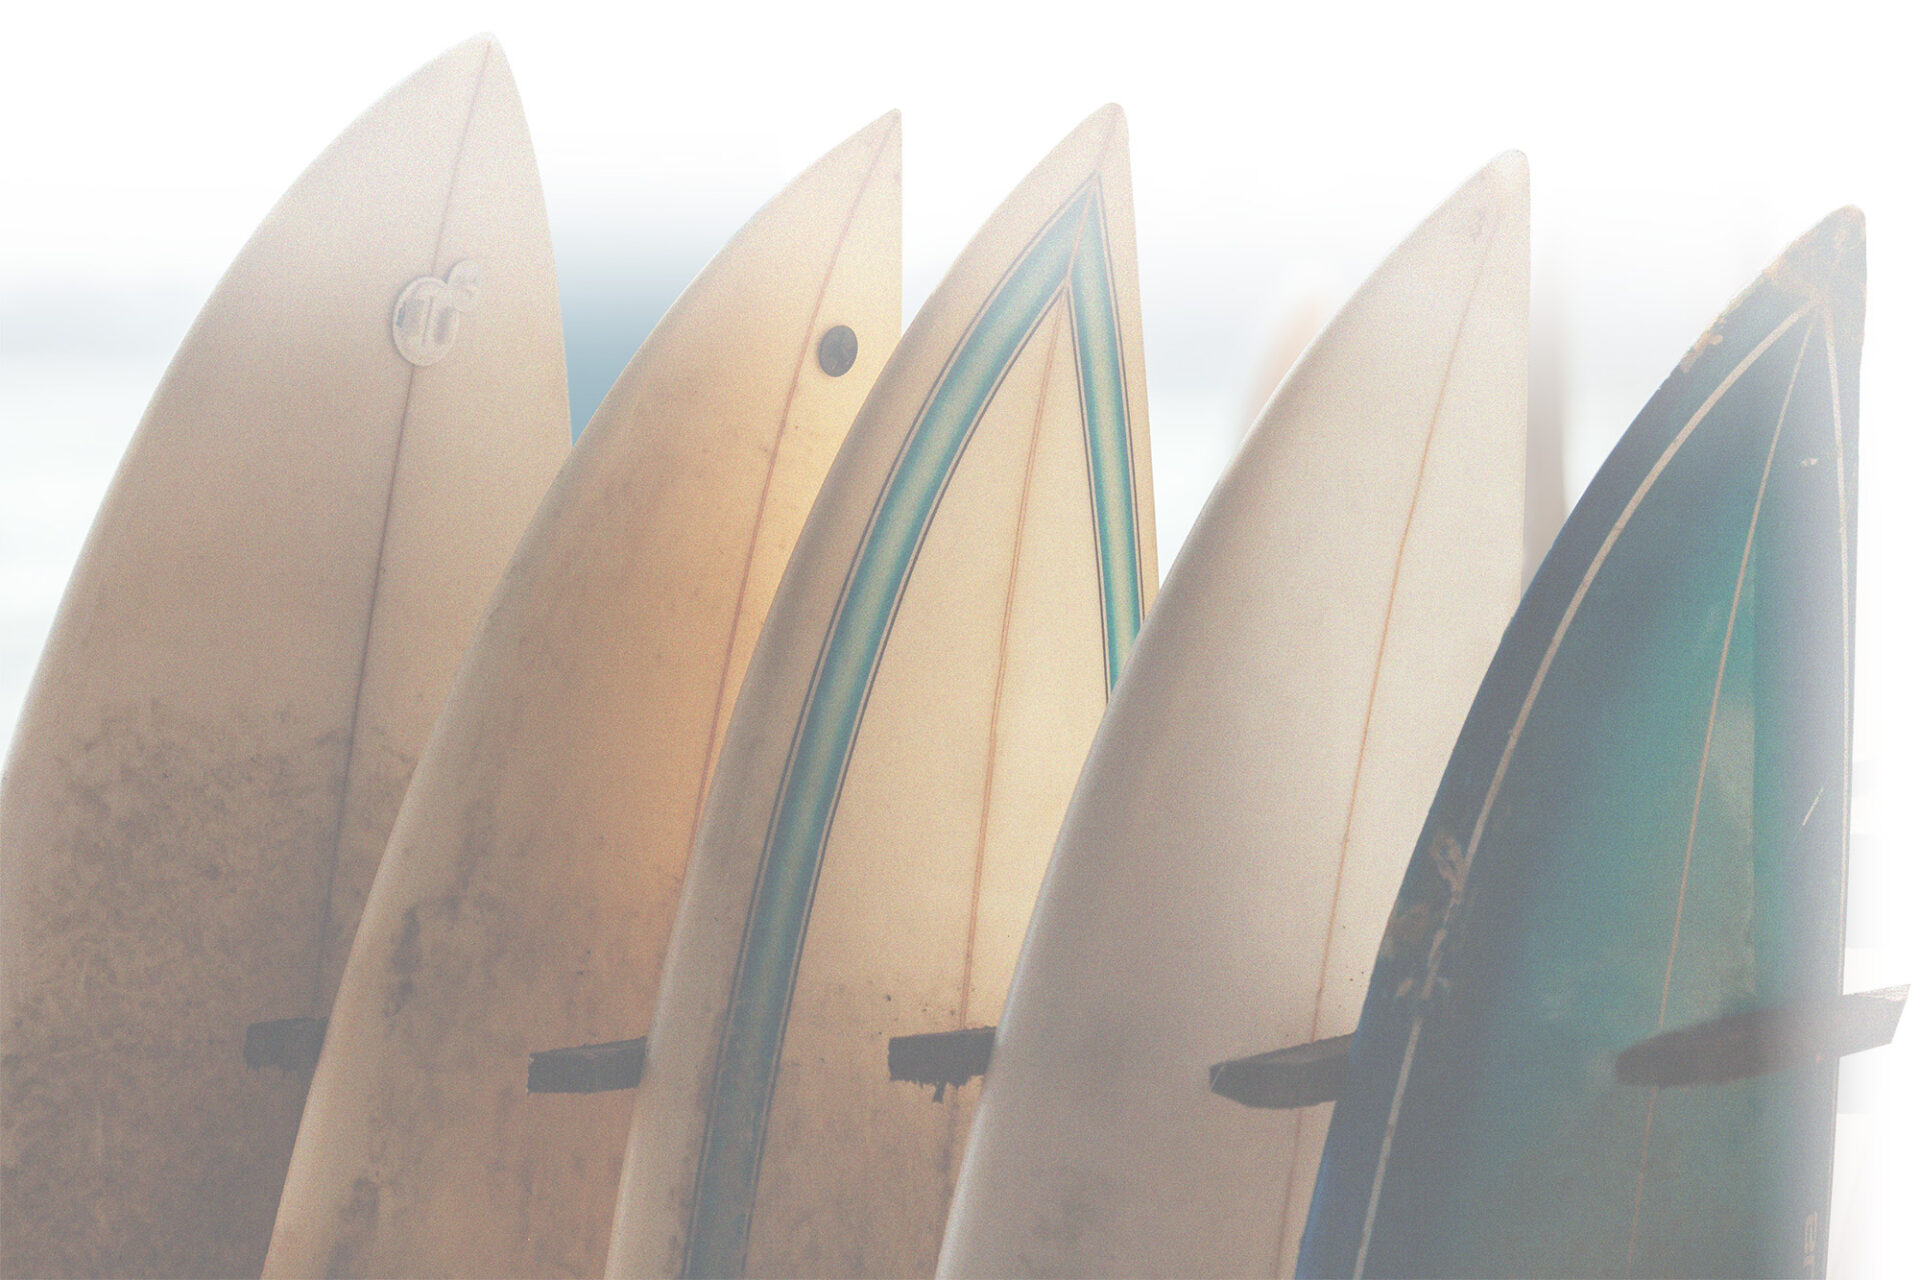 Set of different color surf boards in a stack by ocean.